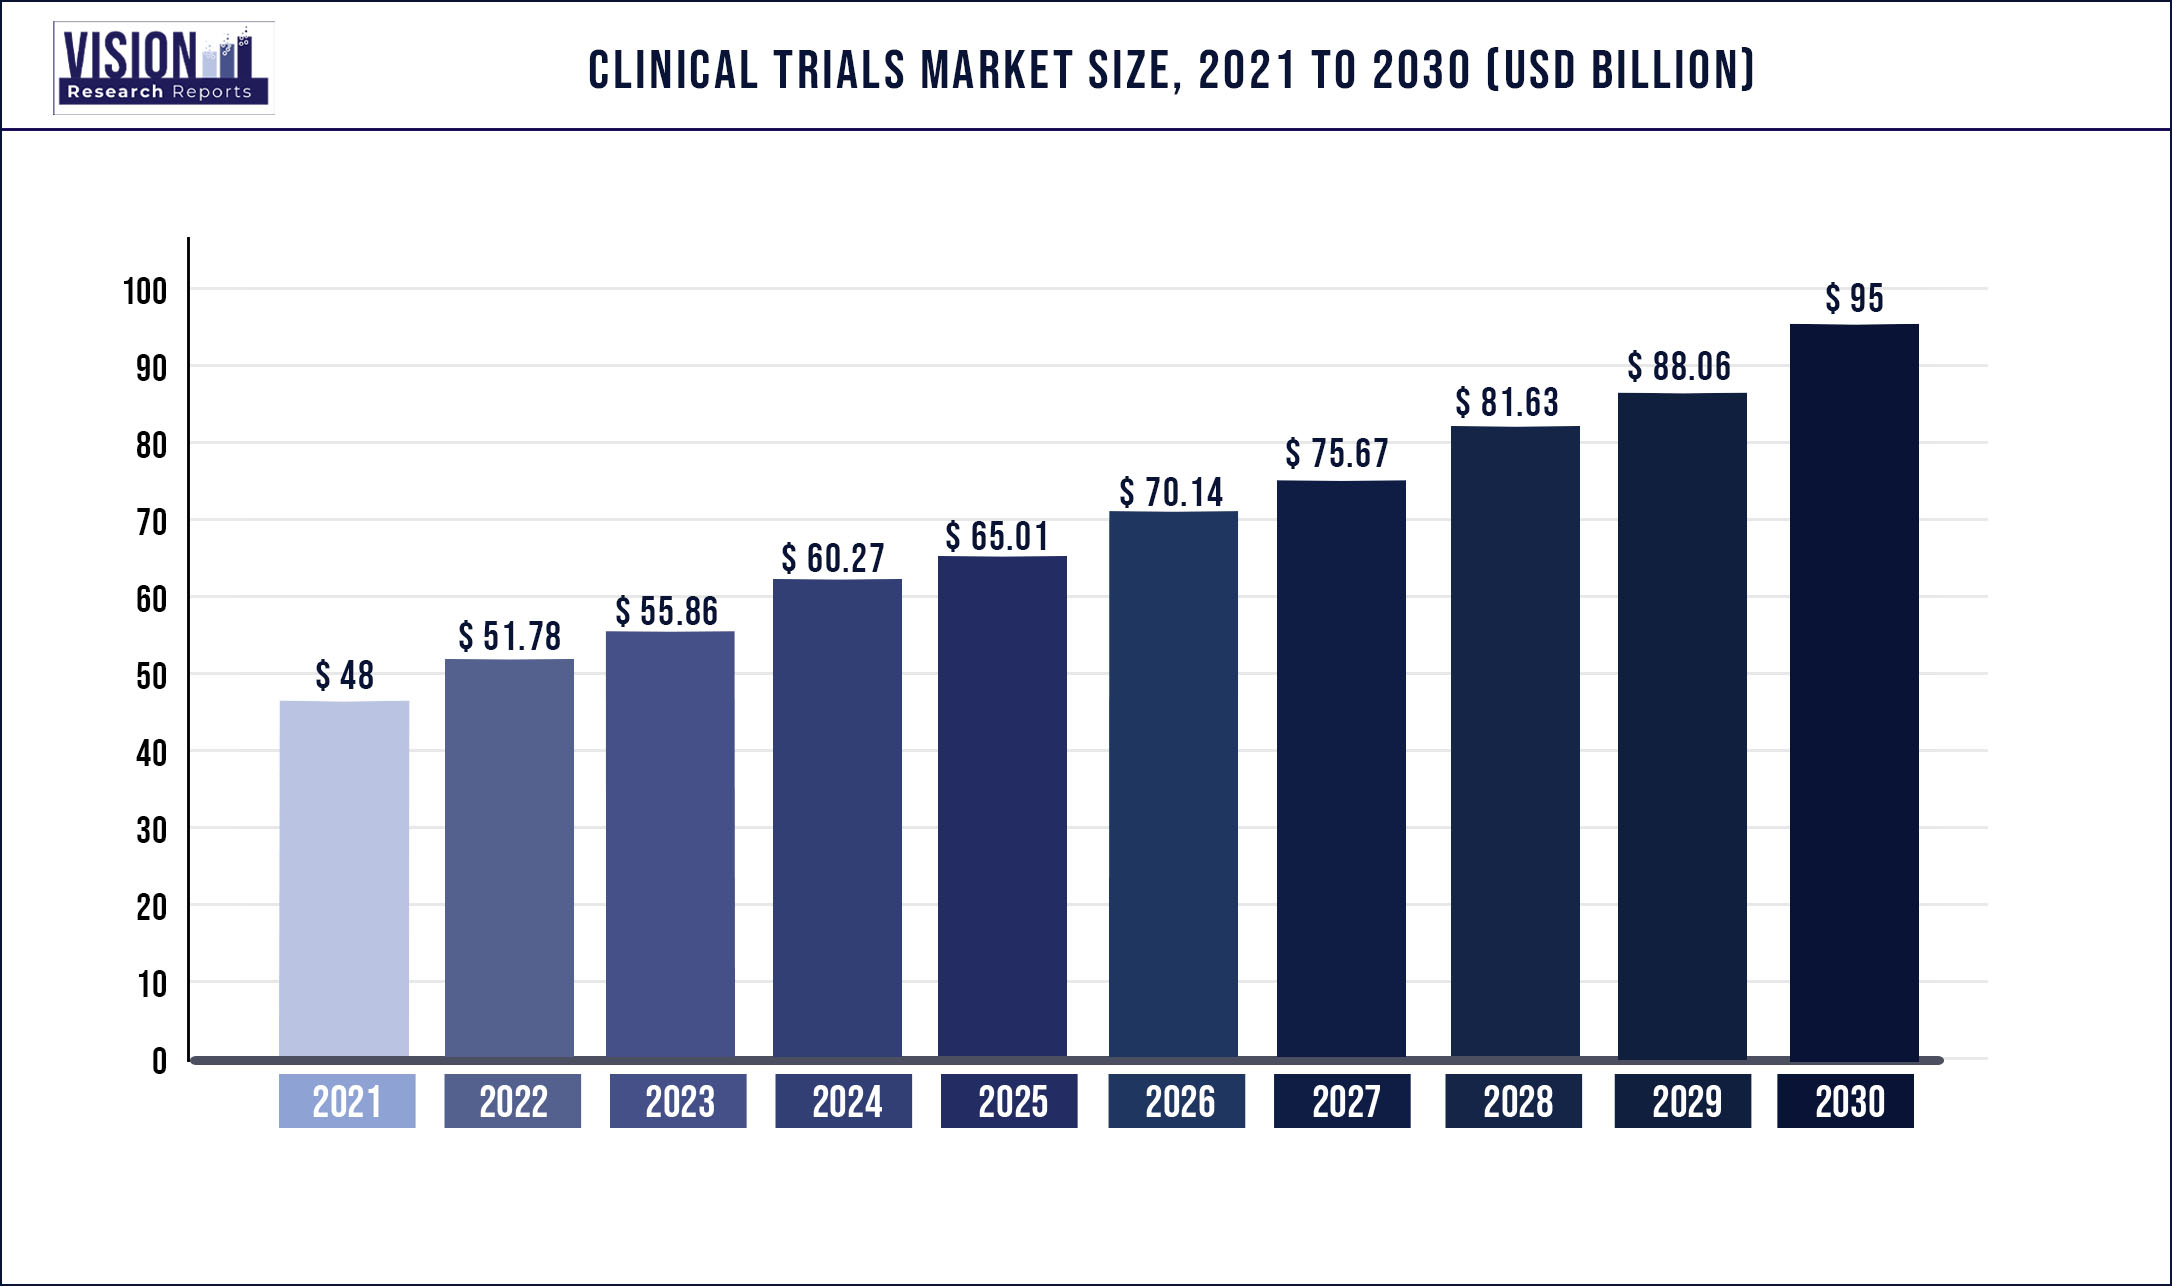 Clinical Trials Market Size 2021 to 2030